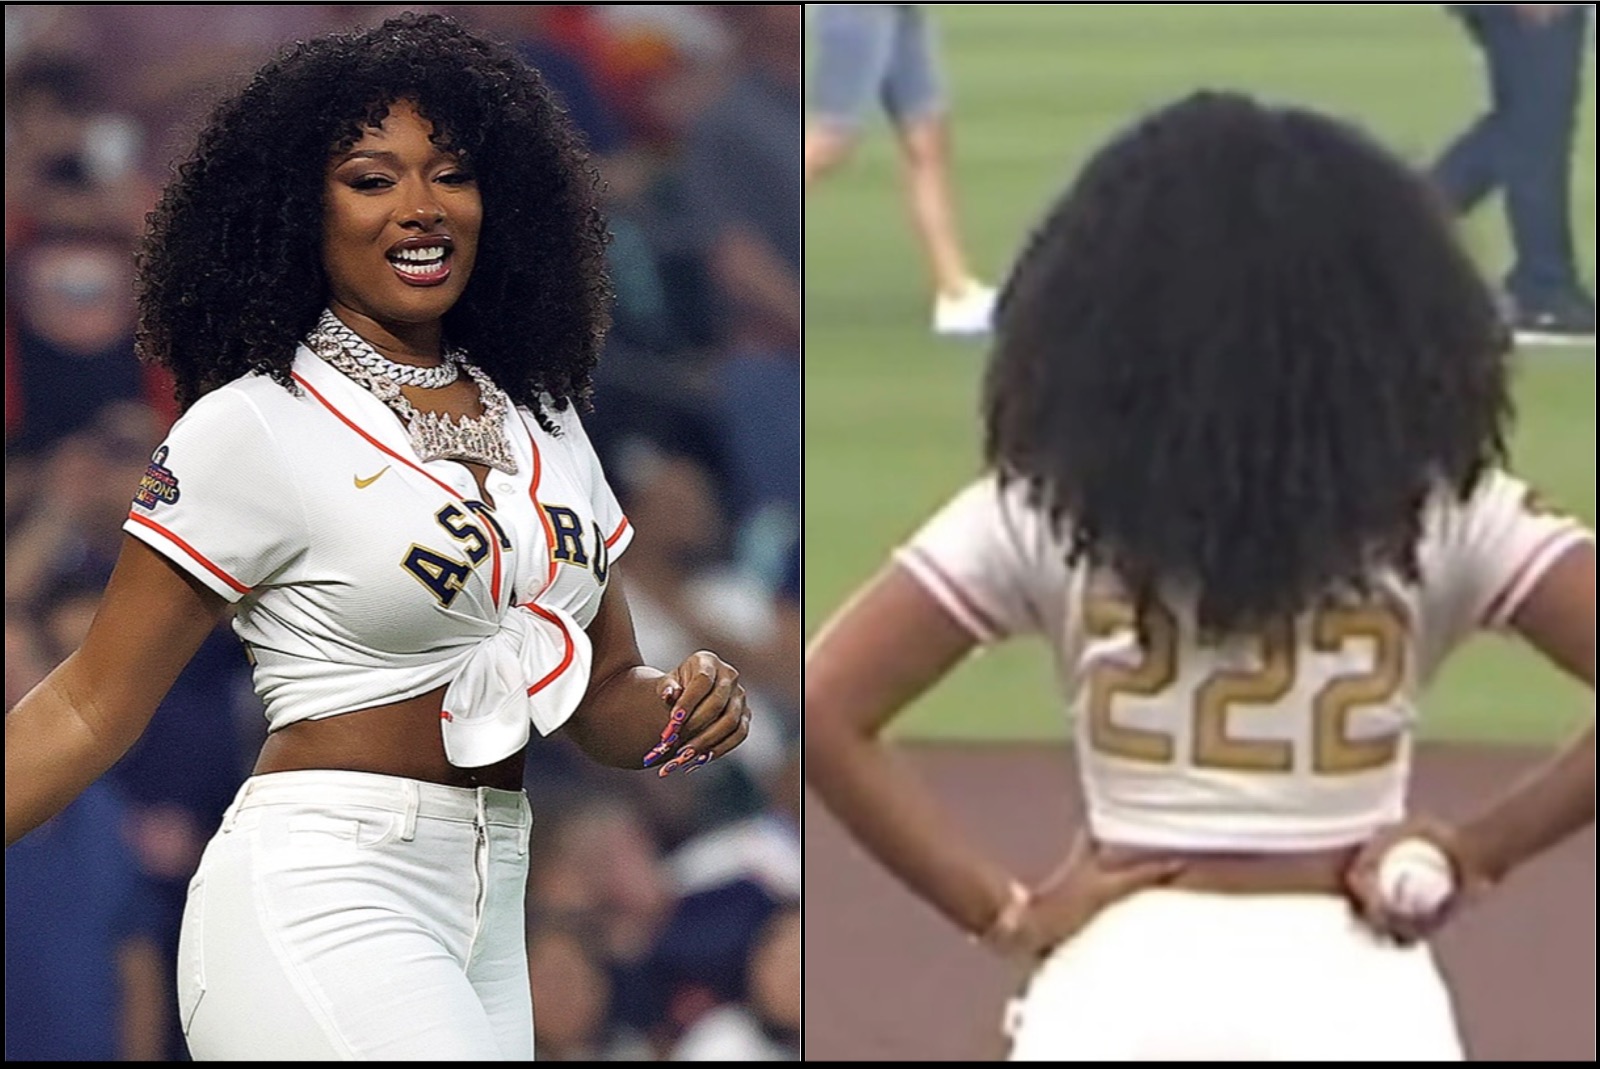 Megan Thee Stallion Goes Viral Showing Off Massive Booty While Throwing Out First Pitch For Astros